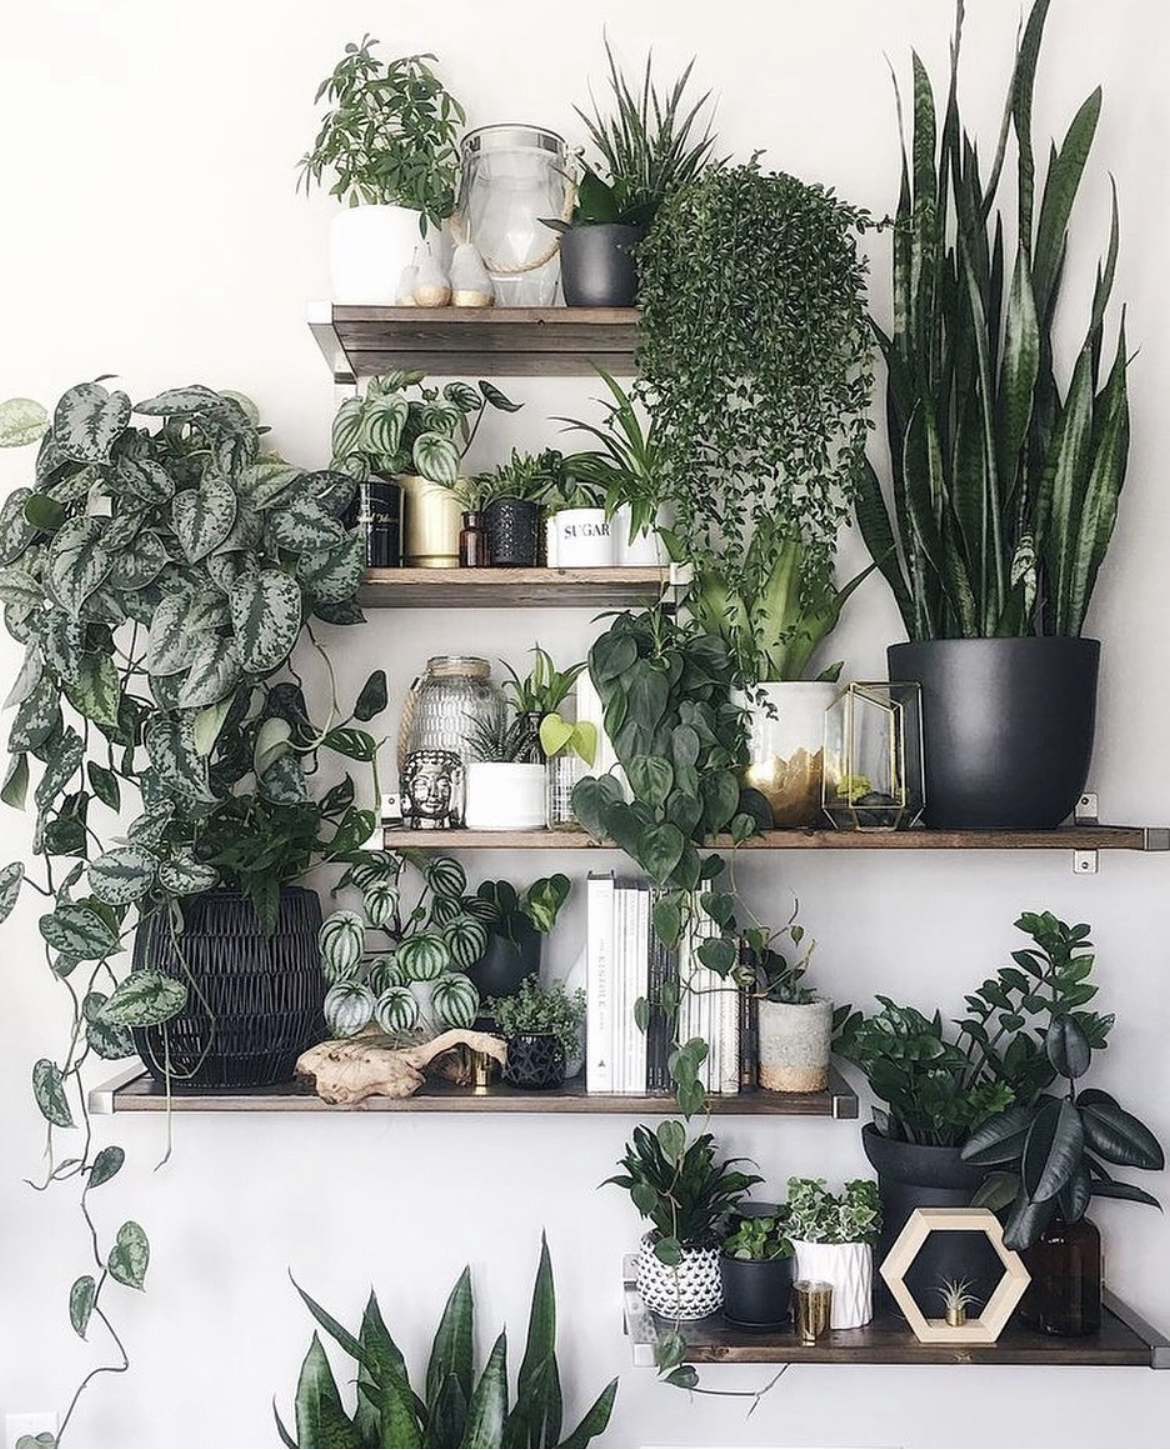 Winter self-care ideas to add to your routine - start an indoor garden